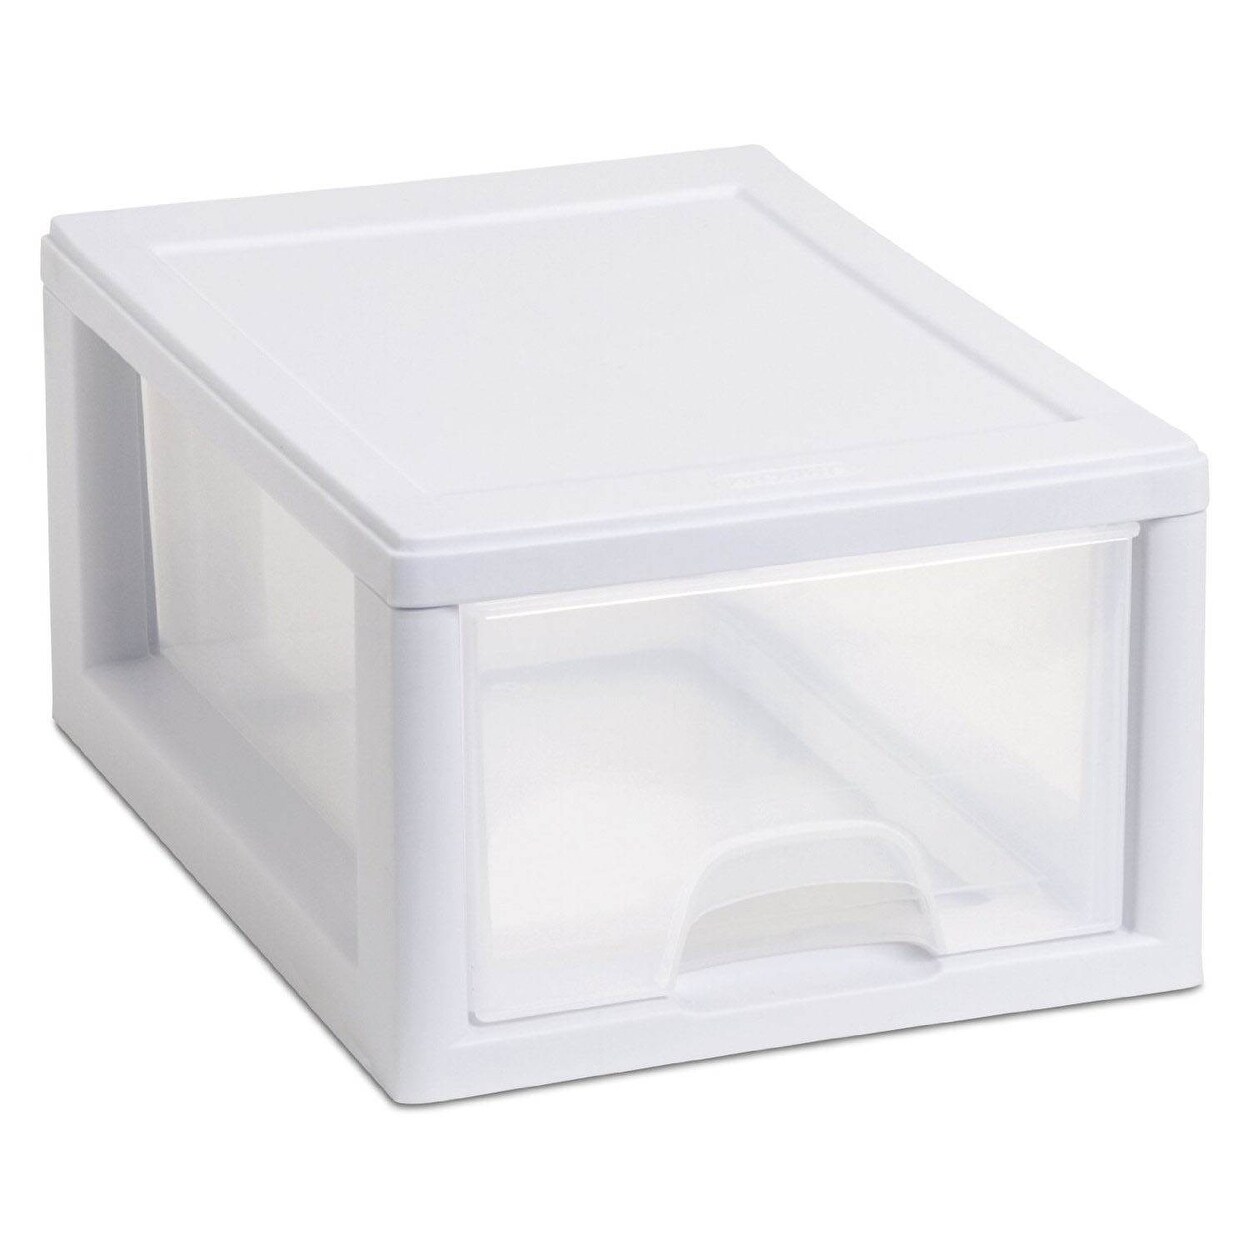 https://ak1.ostkcdn.com/images/products/is/images/direct/0aac7f92208f690ed6efe90f4d3f42a6653f5d13/Sterilite-16-Qt-Clear-Stacking-Storage-Drawer-Container-%286-Pack%29-%2B-6-Qt-%286-Pack%29.jpg